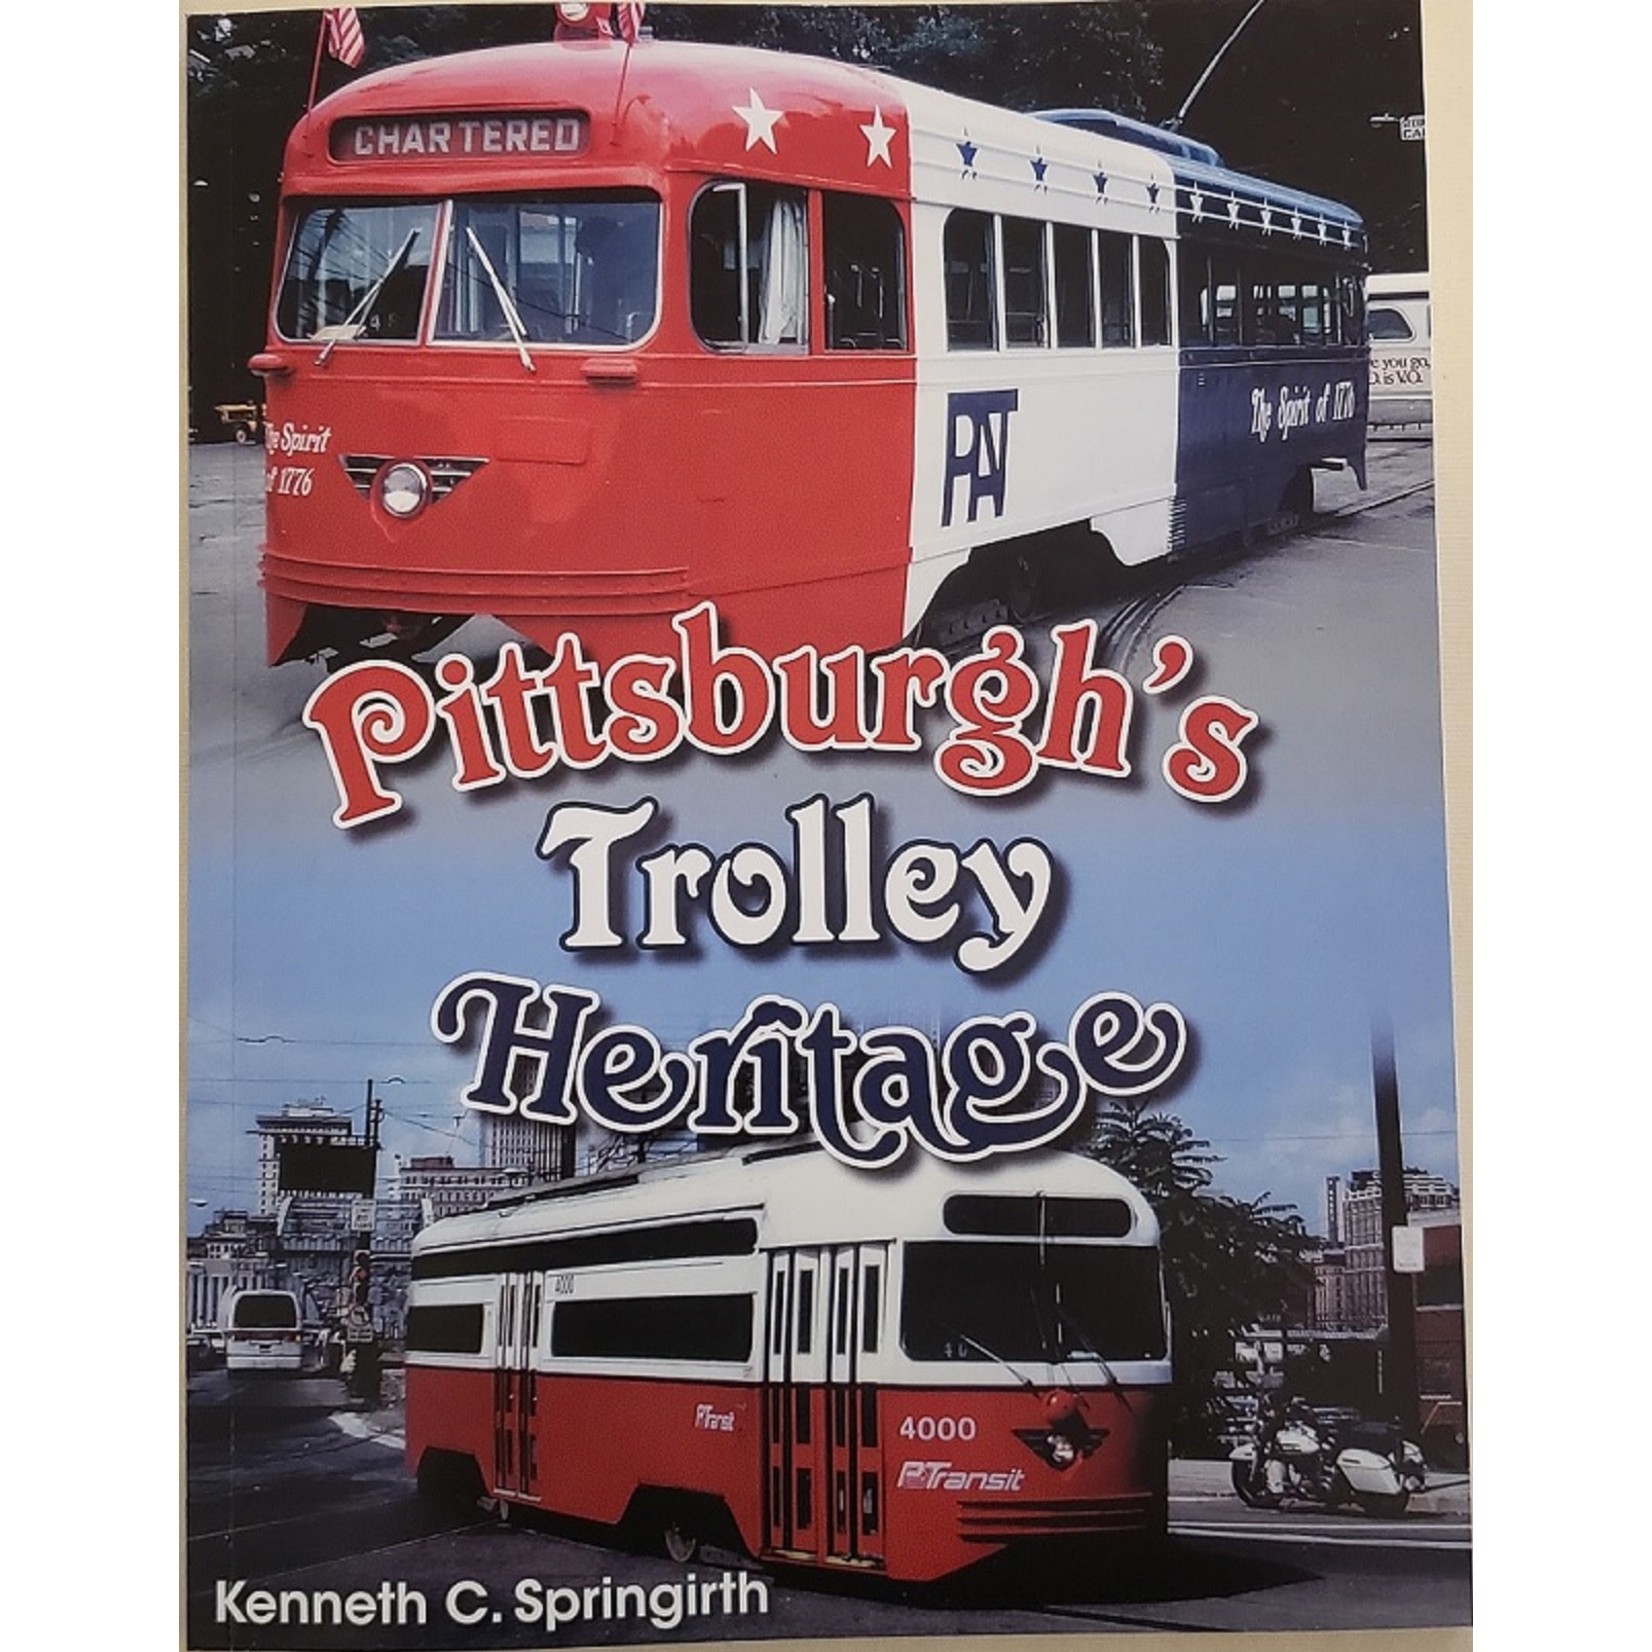 America Through Time Pittsburgh's Trolley Heritage